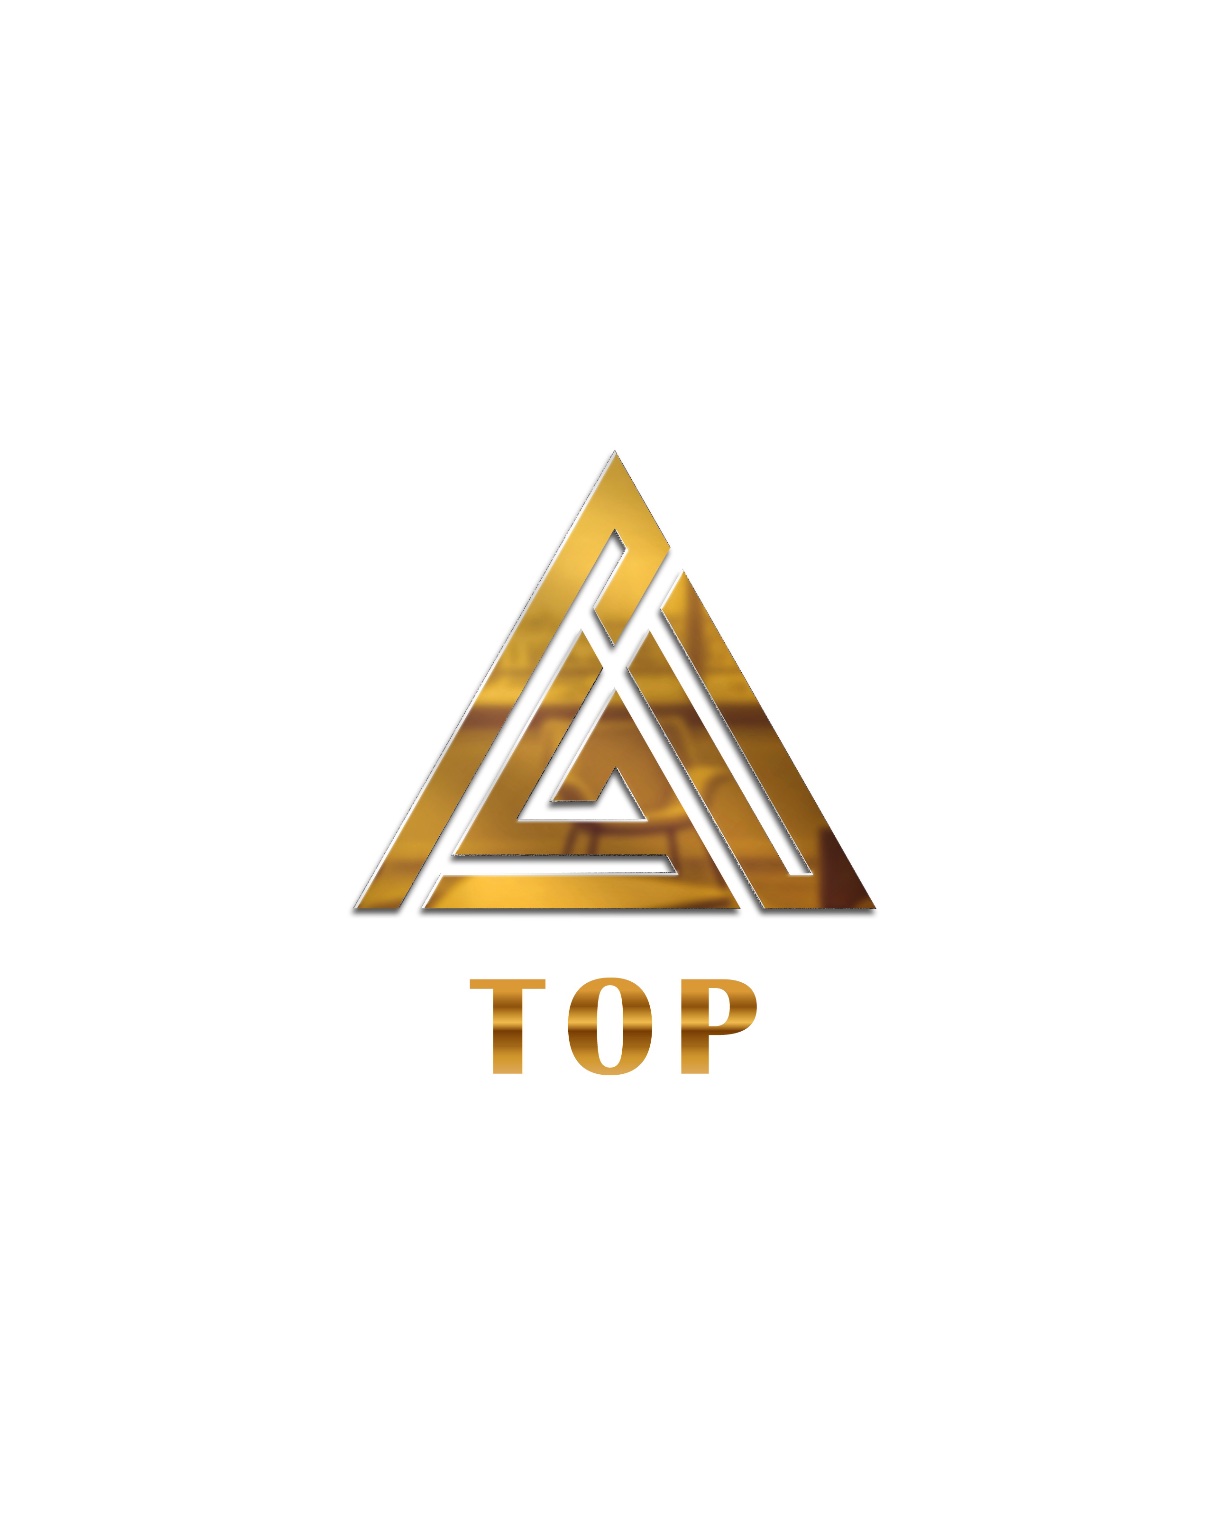 Top business and communication ltd